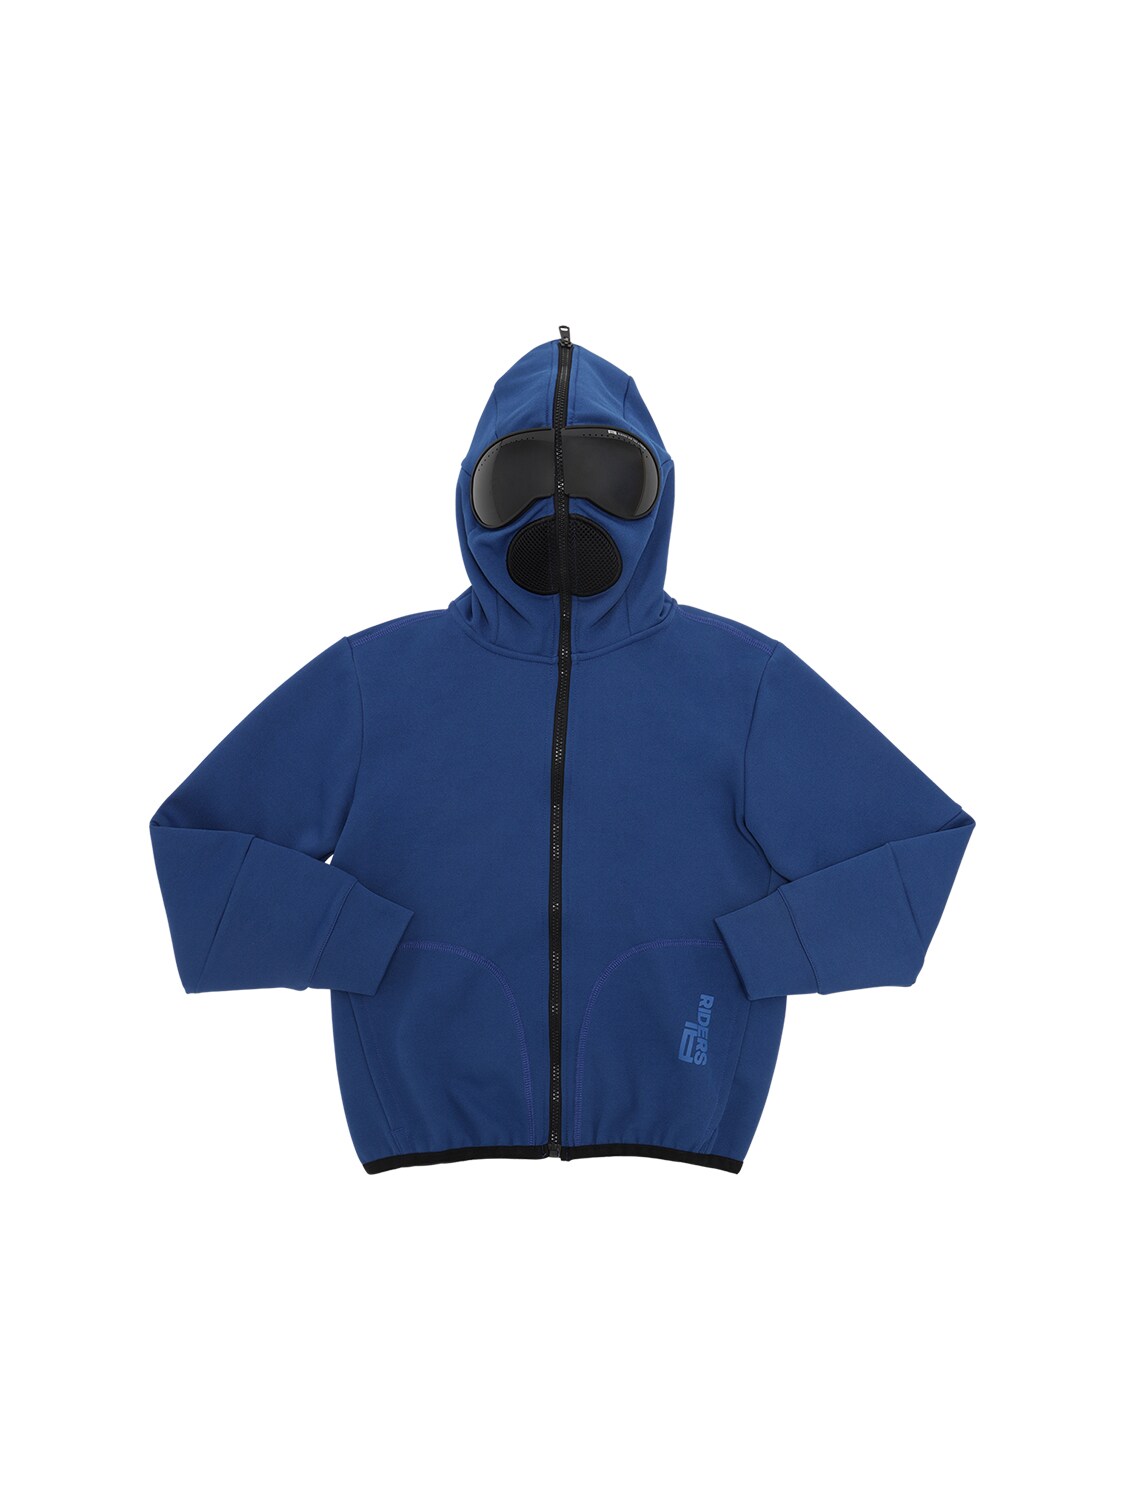 Ai Riders On The Storm Kids' Zip-up Cotton Blend Sweatshirt Hoodie In Royal Blue